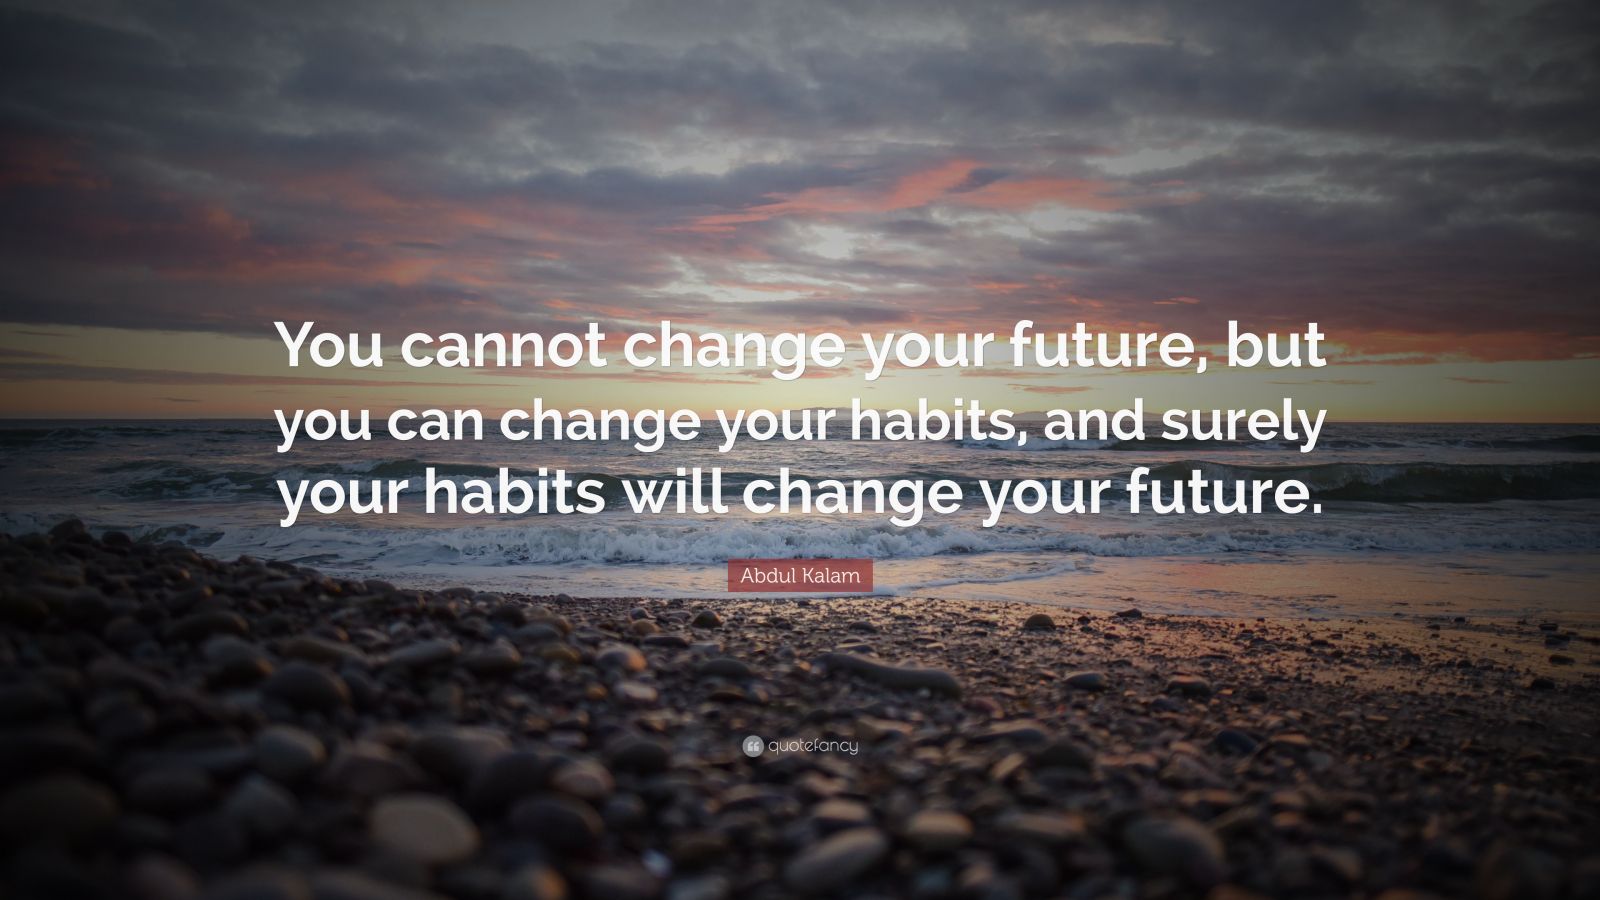 Abdul Kalam Quote: “You cannot change your future, but you can change